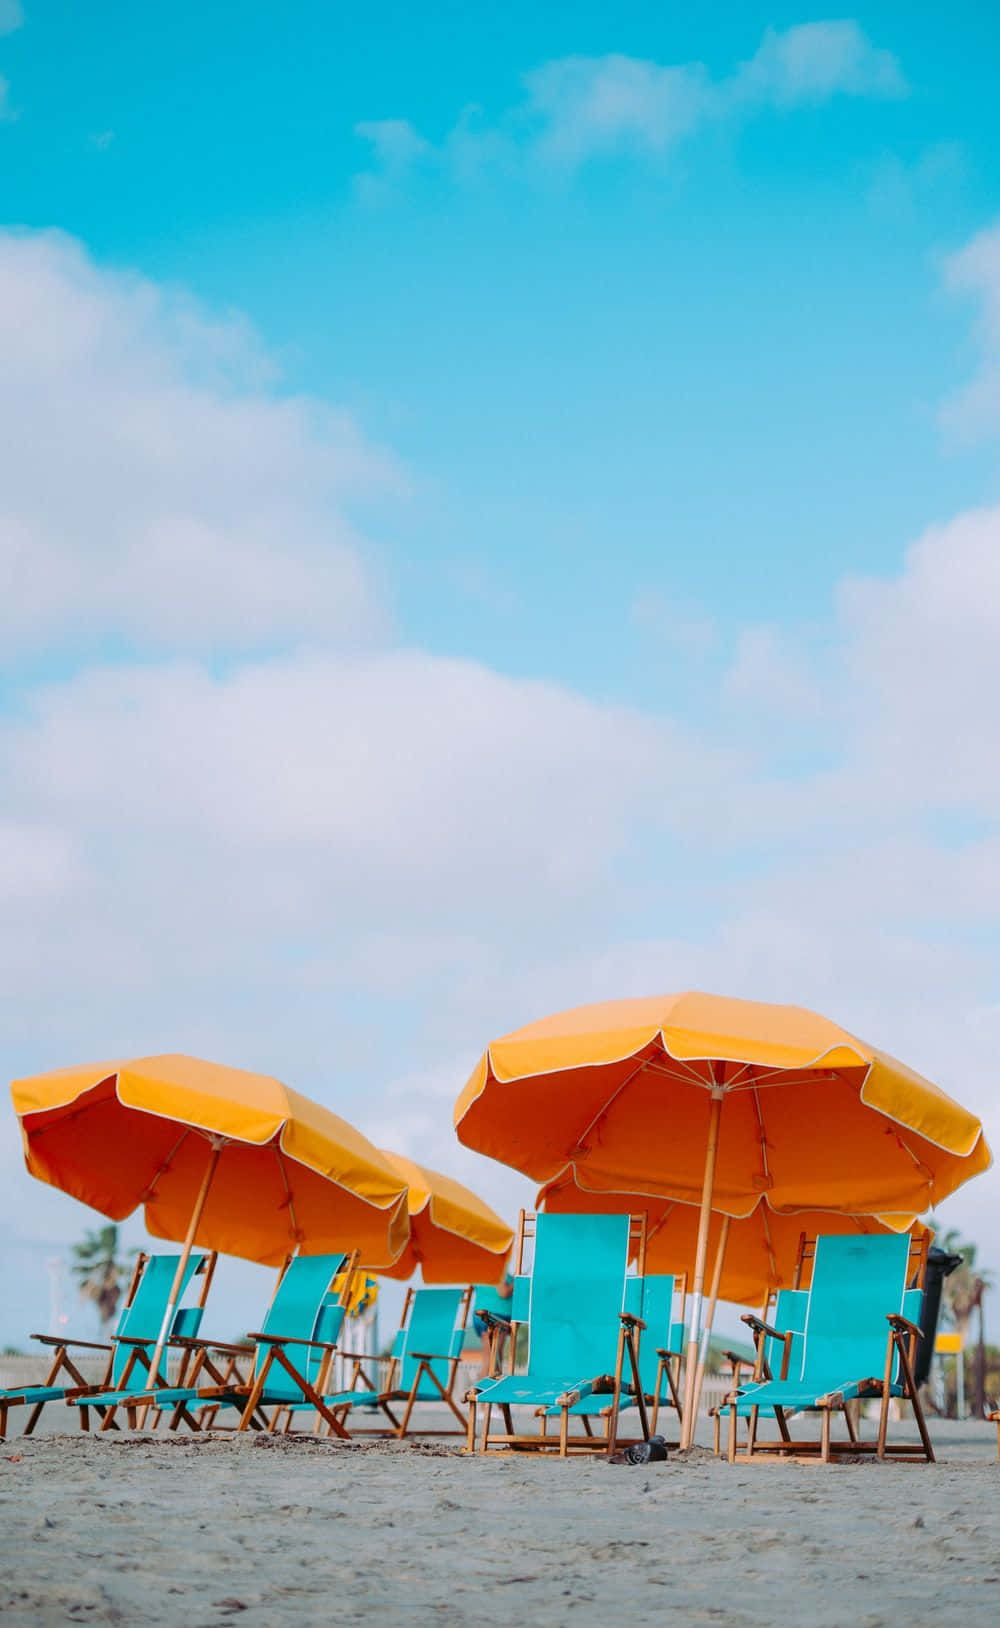 Relaxing Beach Scene with Colorful Umbrella Wallpaper